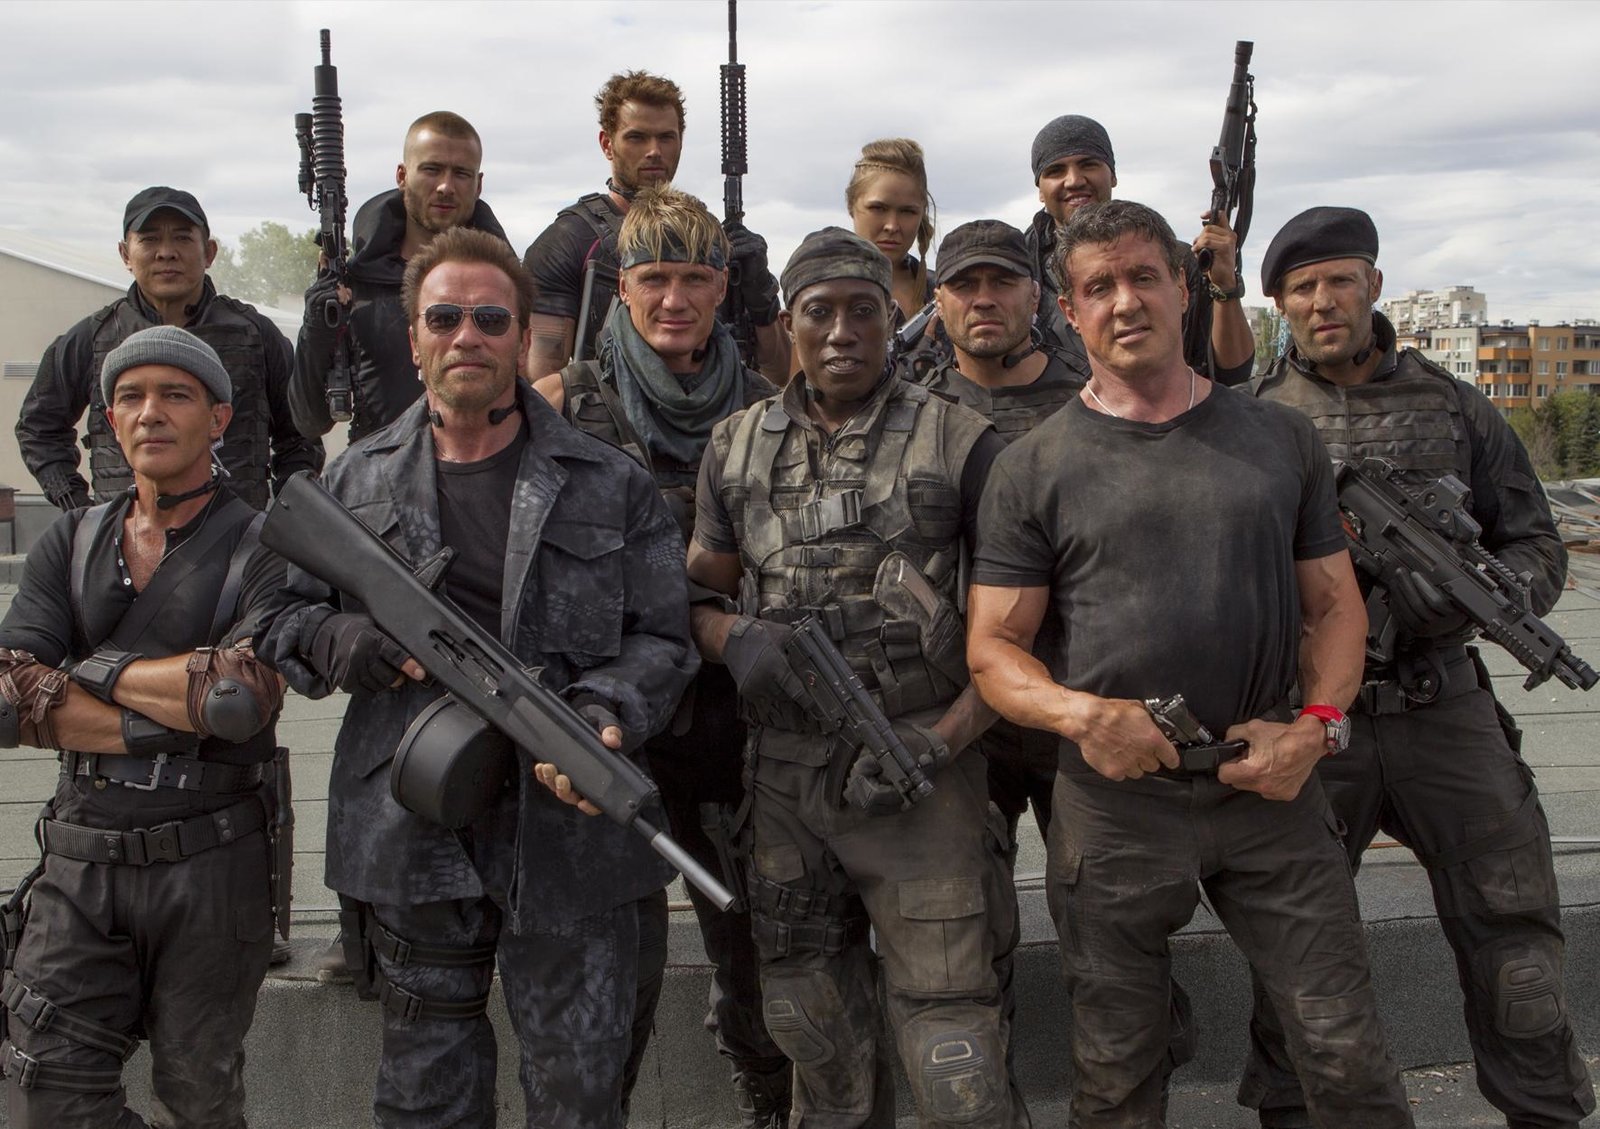 Expendables 3, The - A Man's Job - Uncut Edition